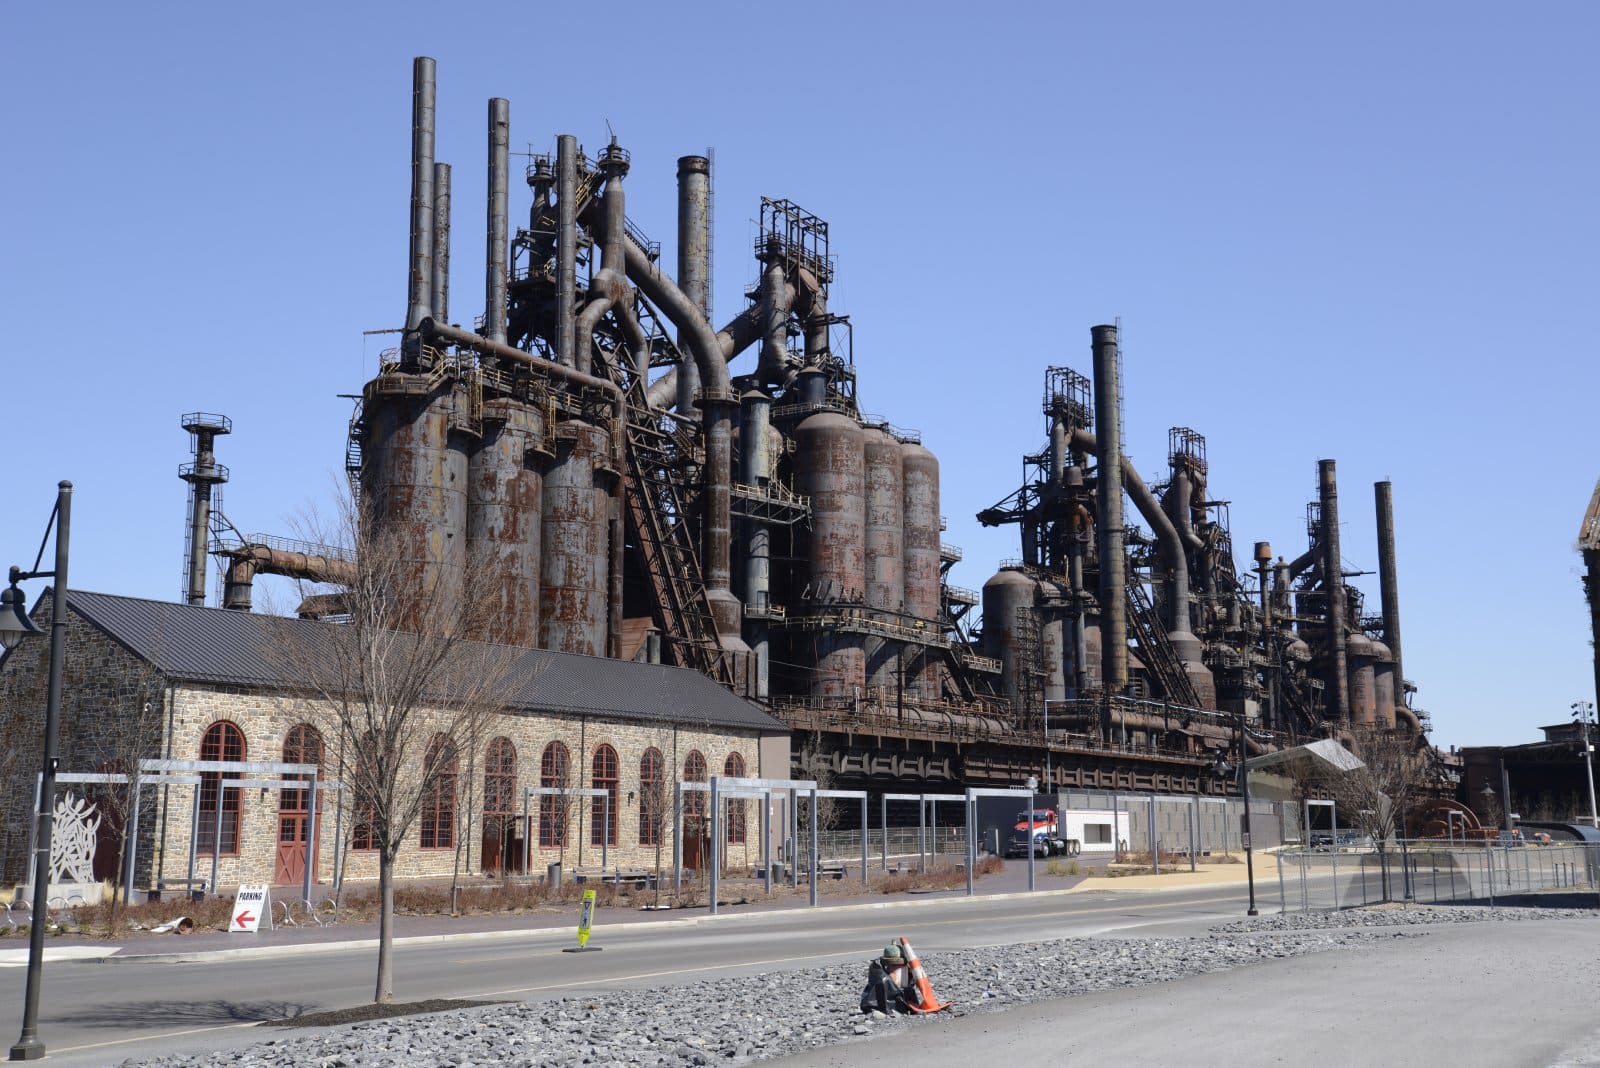 Image Credit: Shutterstock / Cynthia Farmer <p><span>From steel to coal, Pennsylvania’s economy often resists new industries and technologies, sticking to its industrial roots.</span></p>